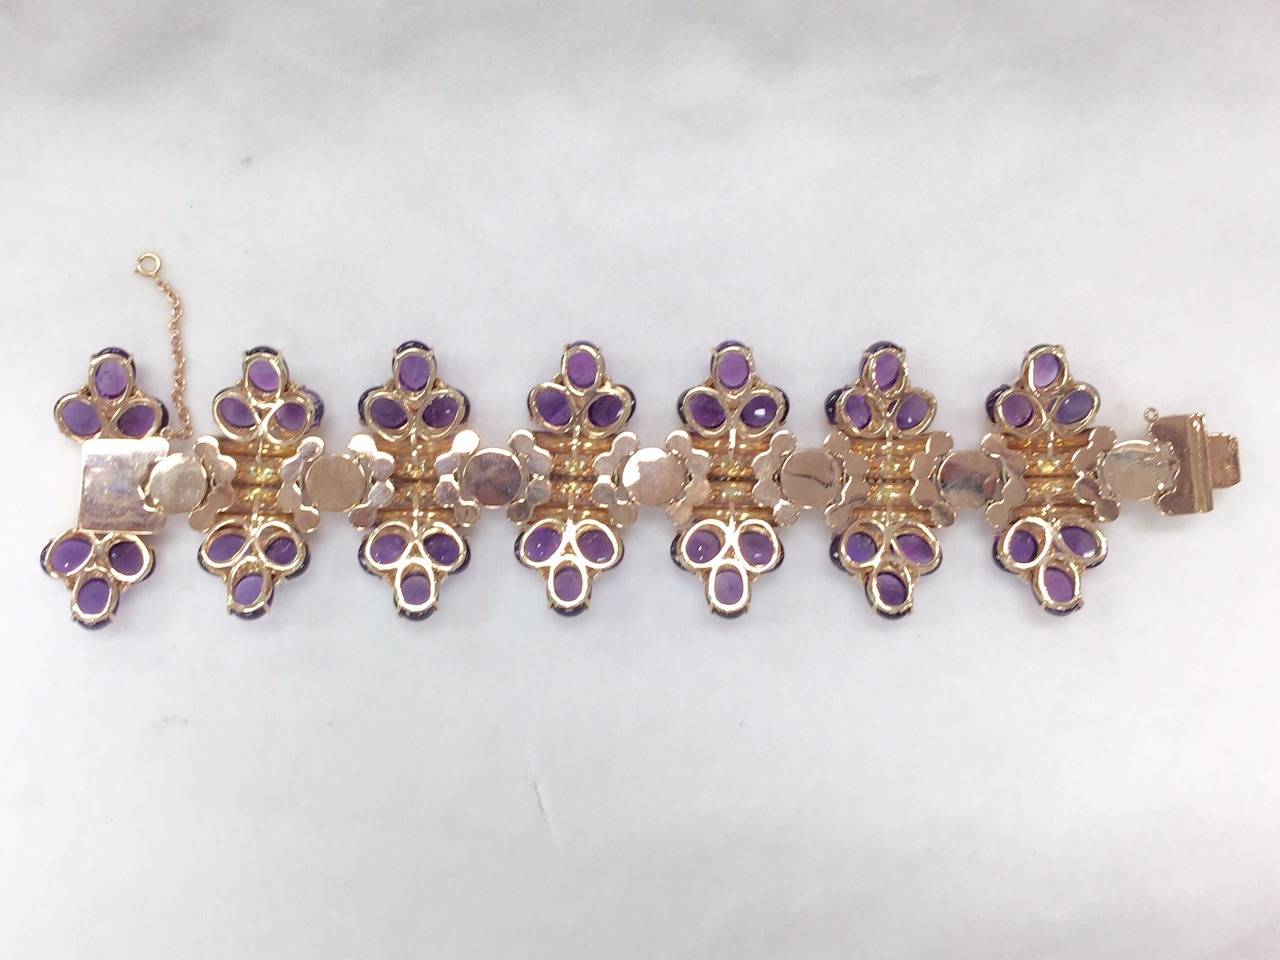 ONE OF A KIND!  This vintage piece is truly remarkable.  18K Rose Gold punctuated by 7 diamond cluster stations, and diamond bands in center of every link.  Perfectly matched cabochon amethysts appear joined together with diamonds.  Single and full